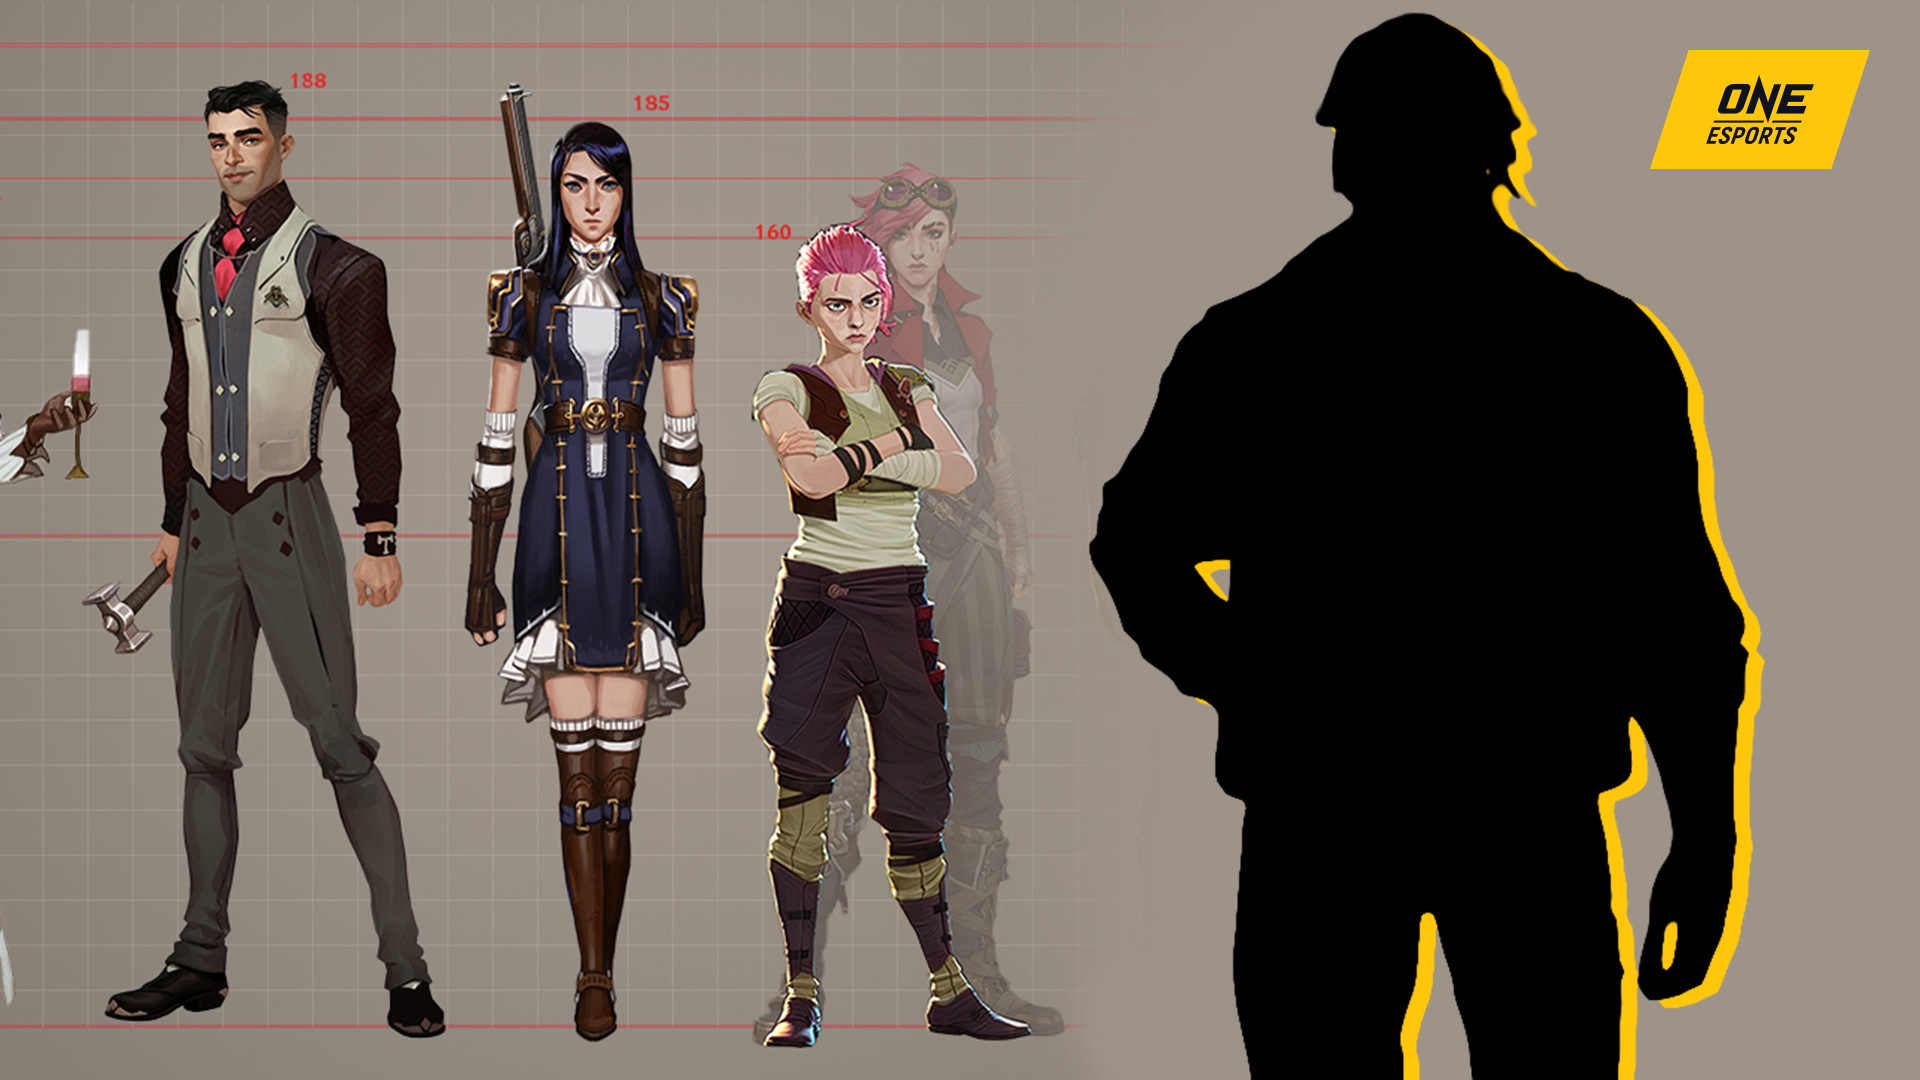 Apparently, Caitlyn is taller than everyone except these 2 Arcane characters - ONE Esports